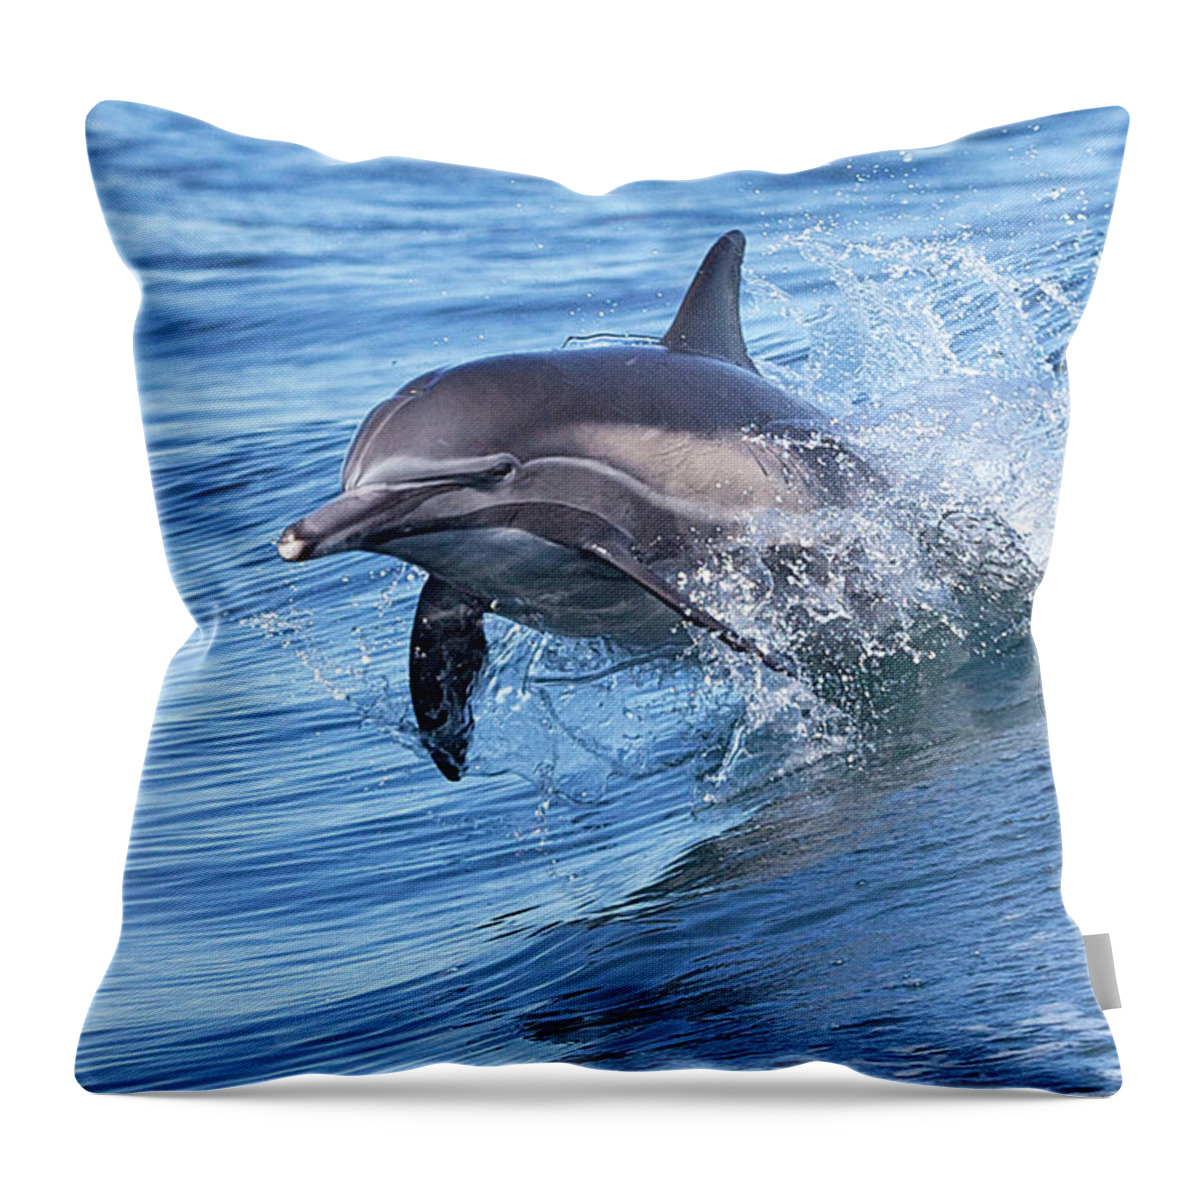 Wake Throw Pillow featuring the photograph Dolphin Riding Wake by Greg Boreham (treklightly)